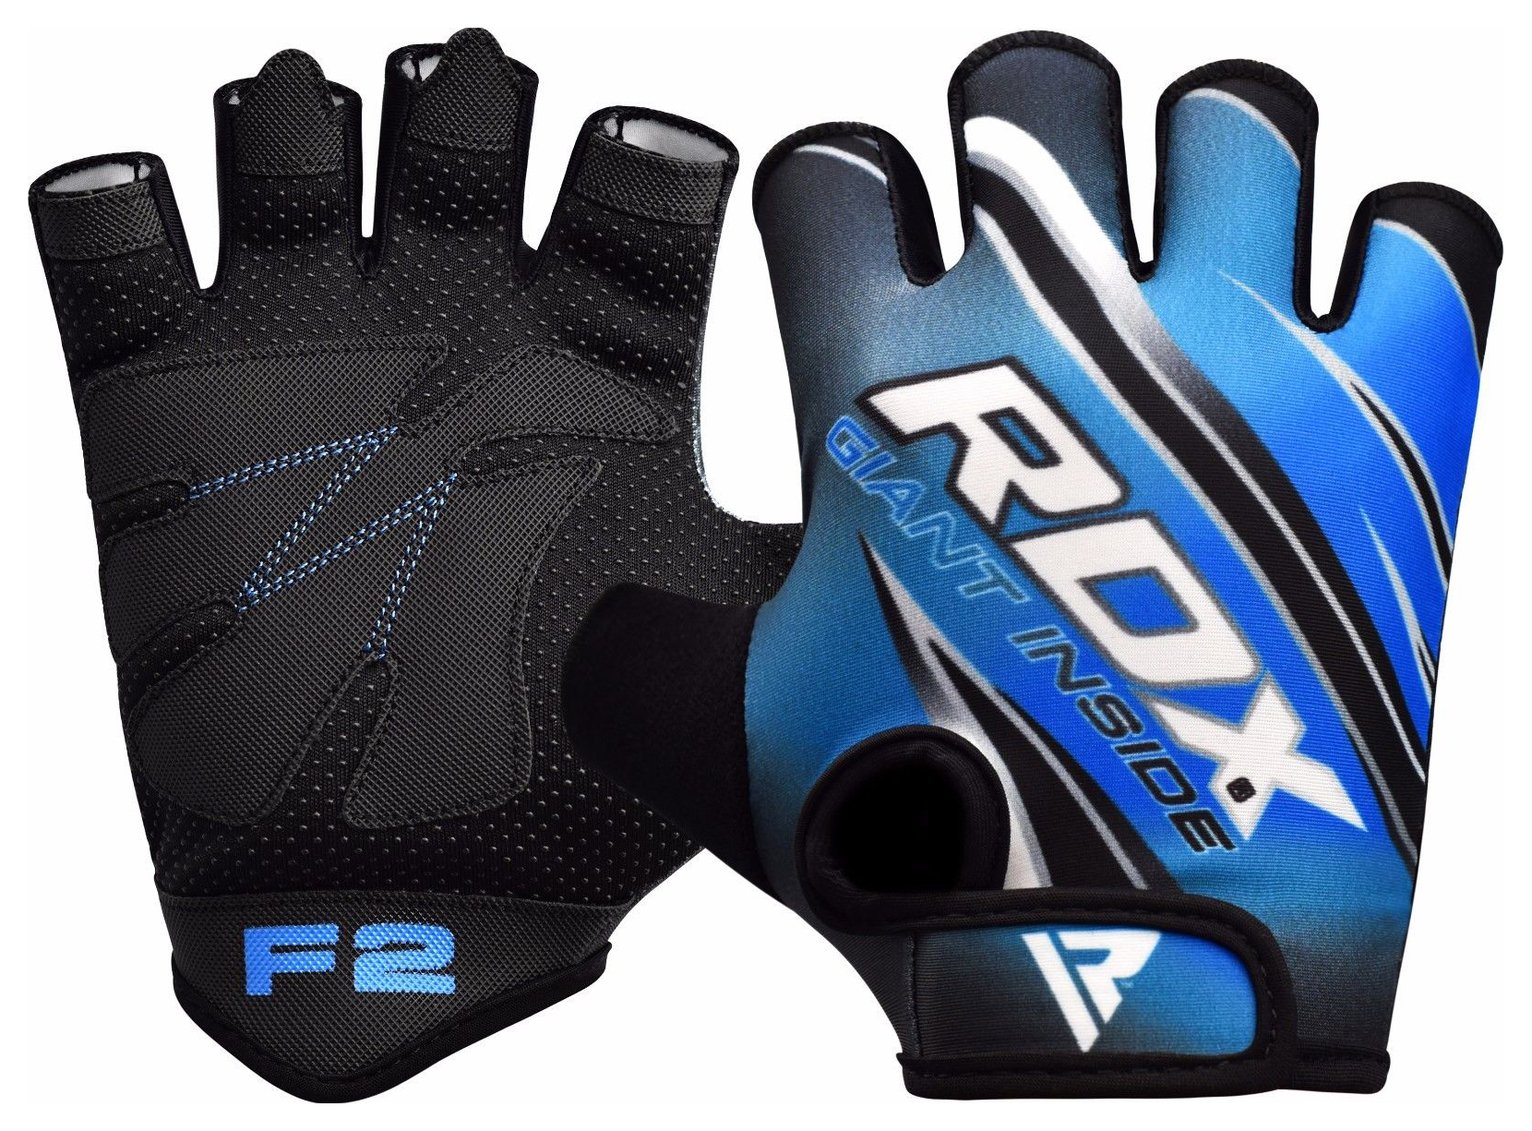 RDX Workout Gym Gloves Blue Large Extra Large review